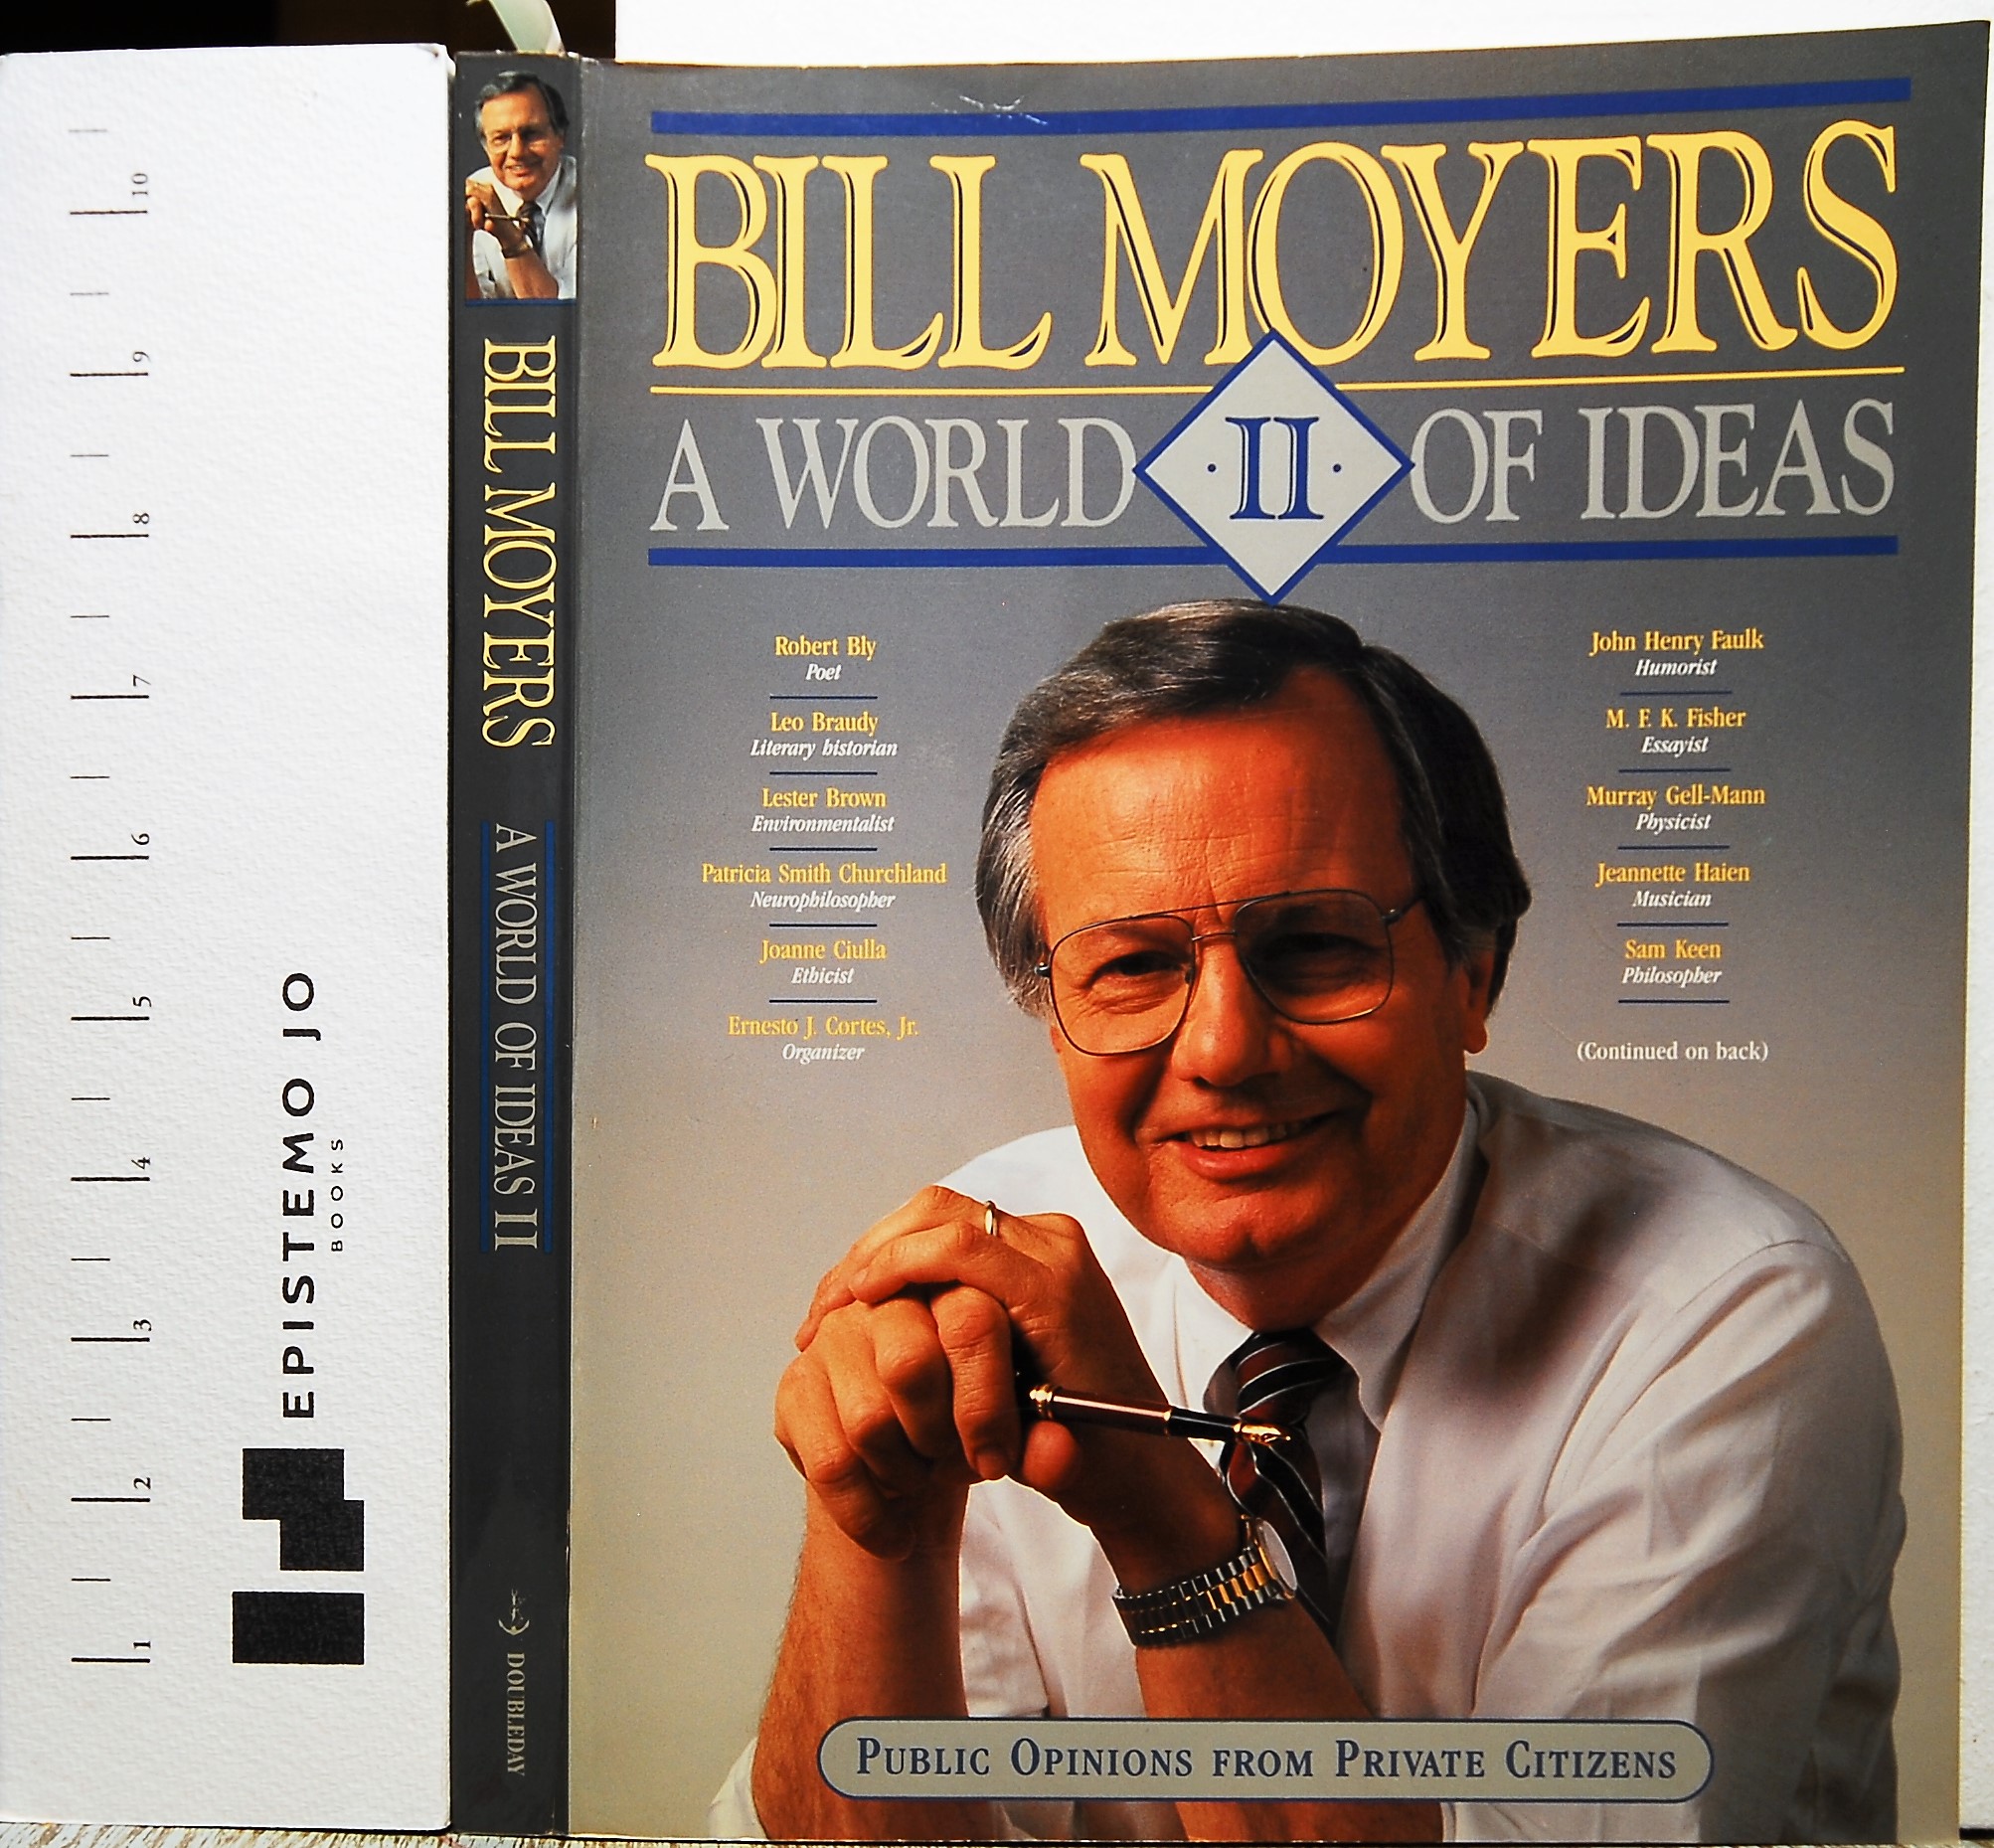 Bill Moyers A World of Ideas II - Edited by Tucher, Andie